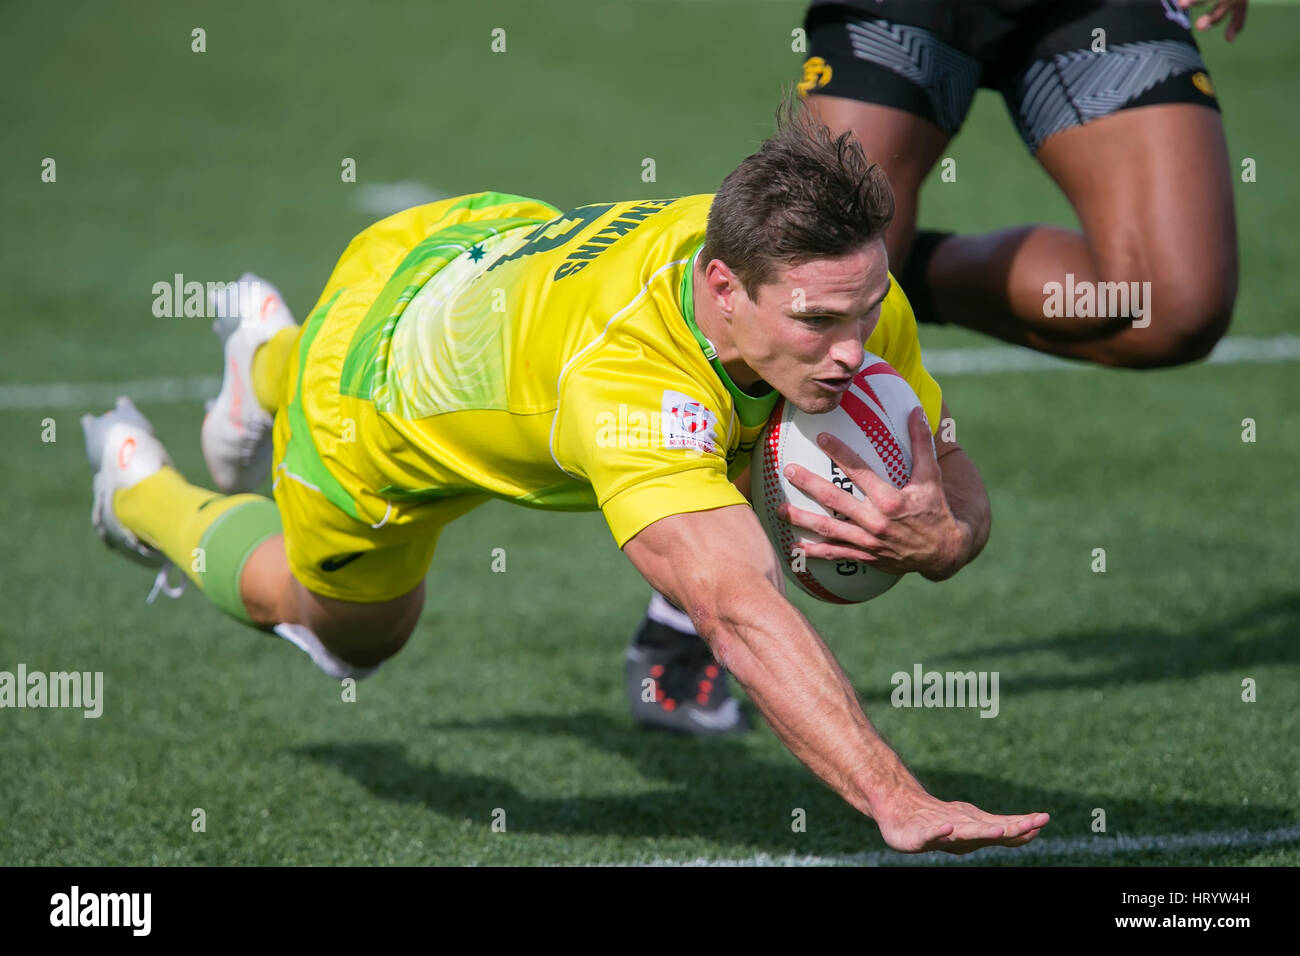 Las Vegas, NV, USA. 4th Mar, 2017. Ed Jenkins #9 of Australia dives in for a score during Pool D play of the rugby sevens match between Fiji and Australia at Sam Boyd Stadium in Las Vegas, Nv. Fiji defeated Australia 24-17. Damon Tarver/Cal Sport Media/Alamy Live News Stock Photo